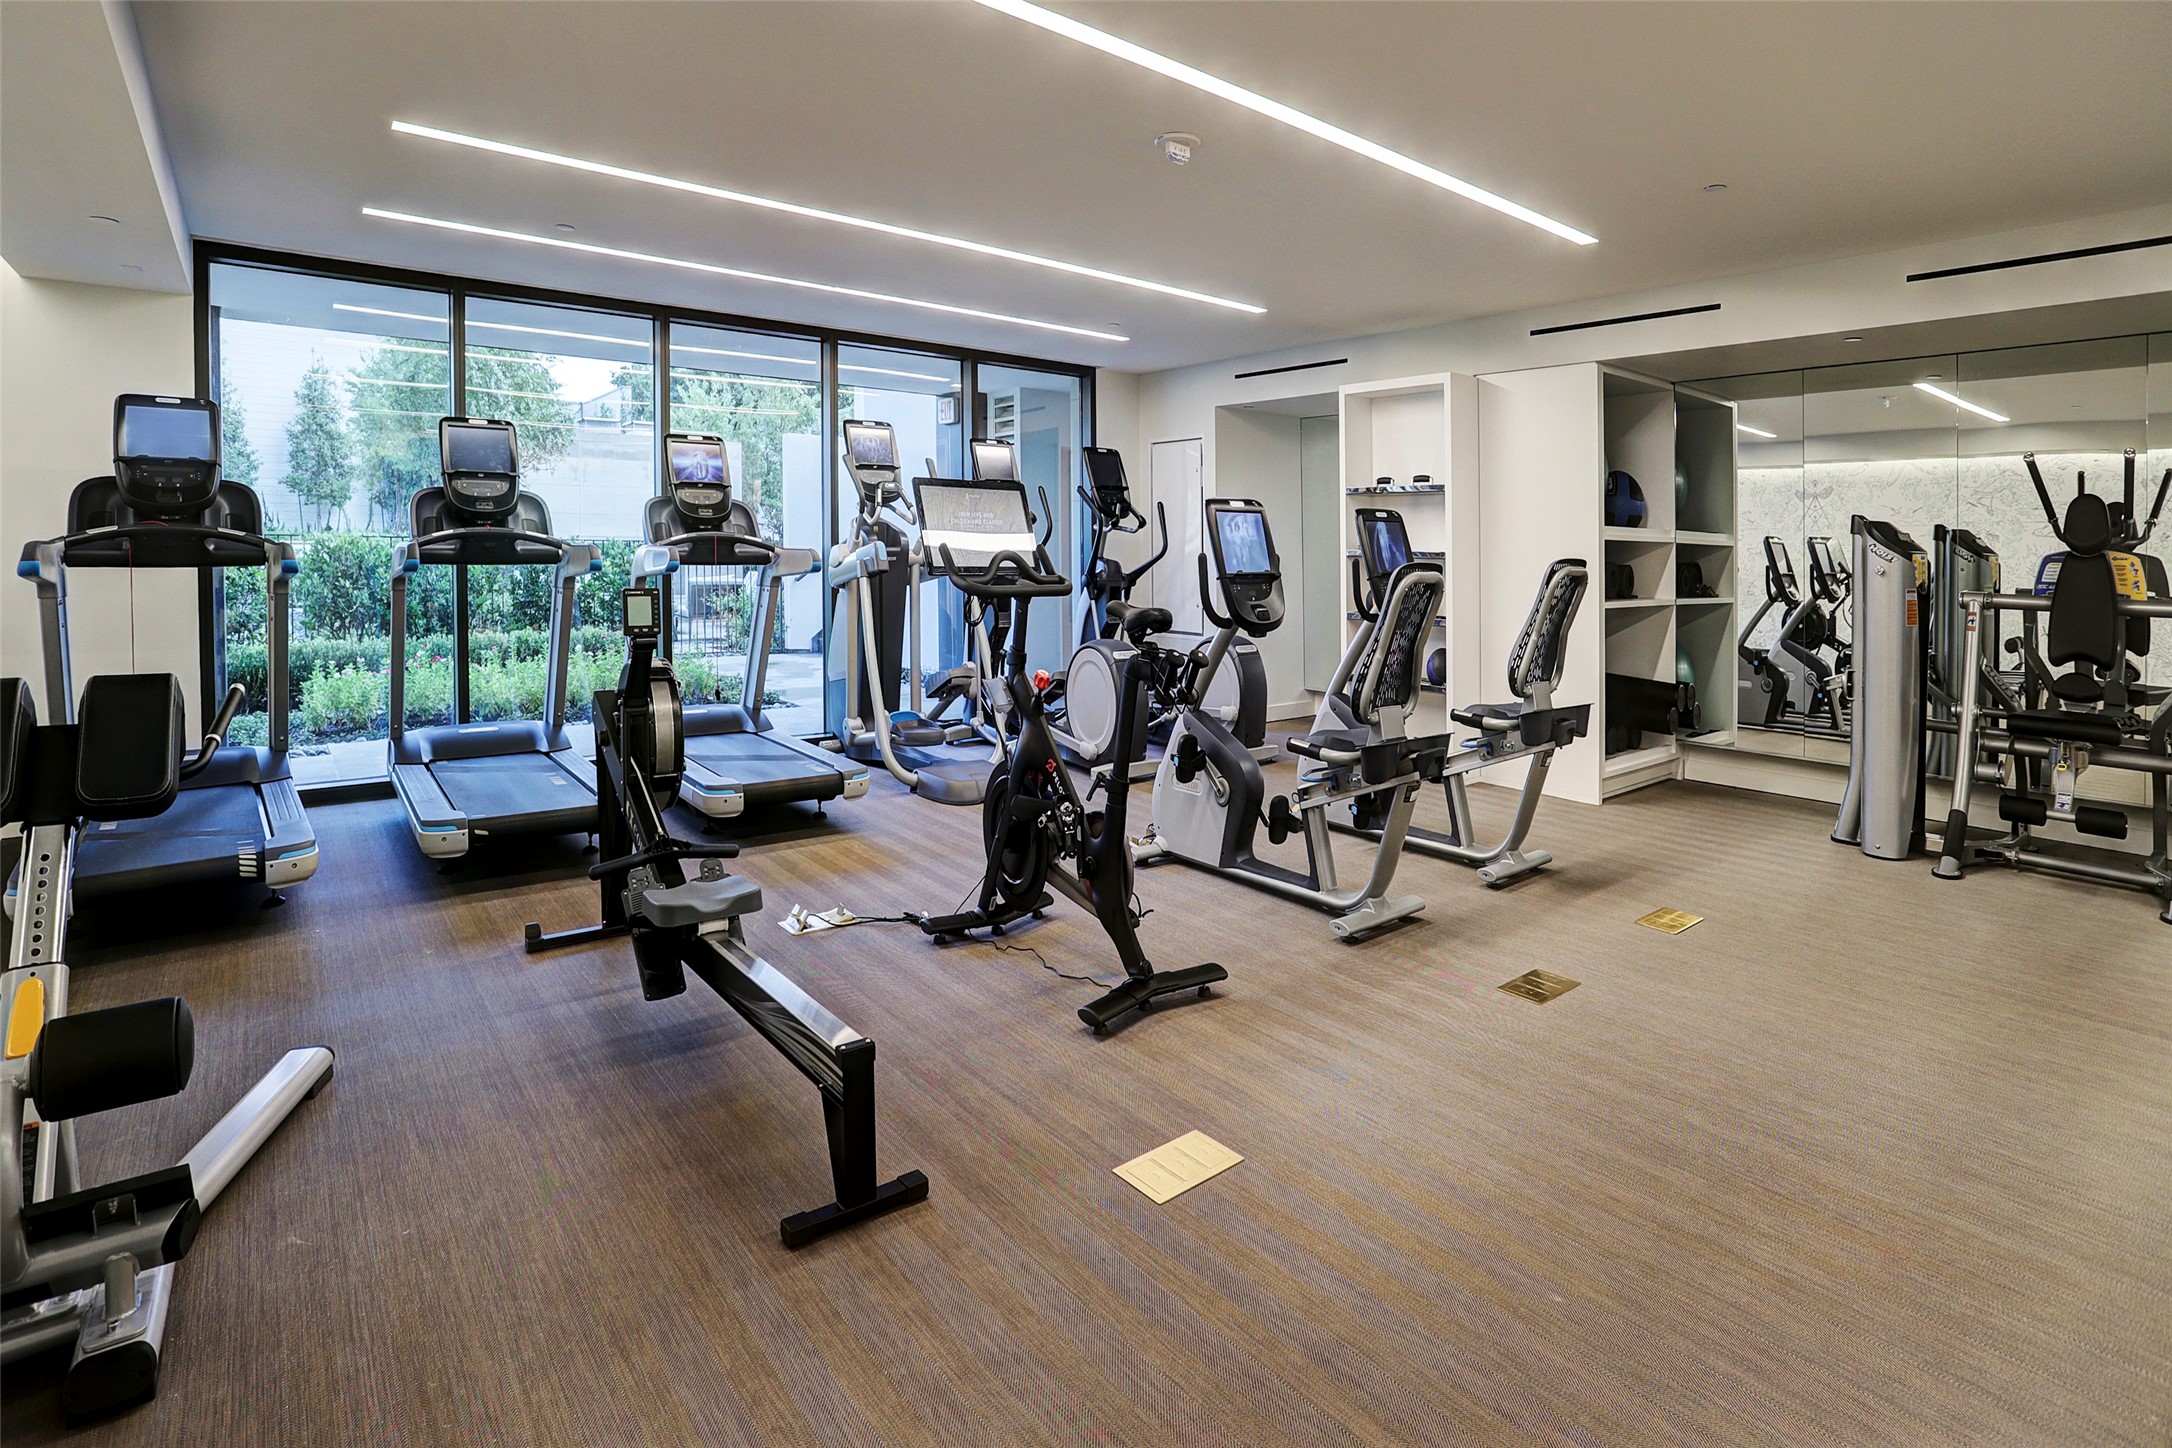 This gym has everything you need with lots of natural light. There is an additional private room to do yoga or Pilates.